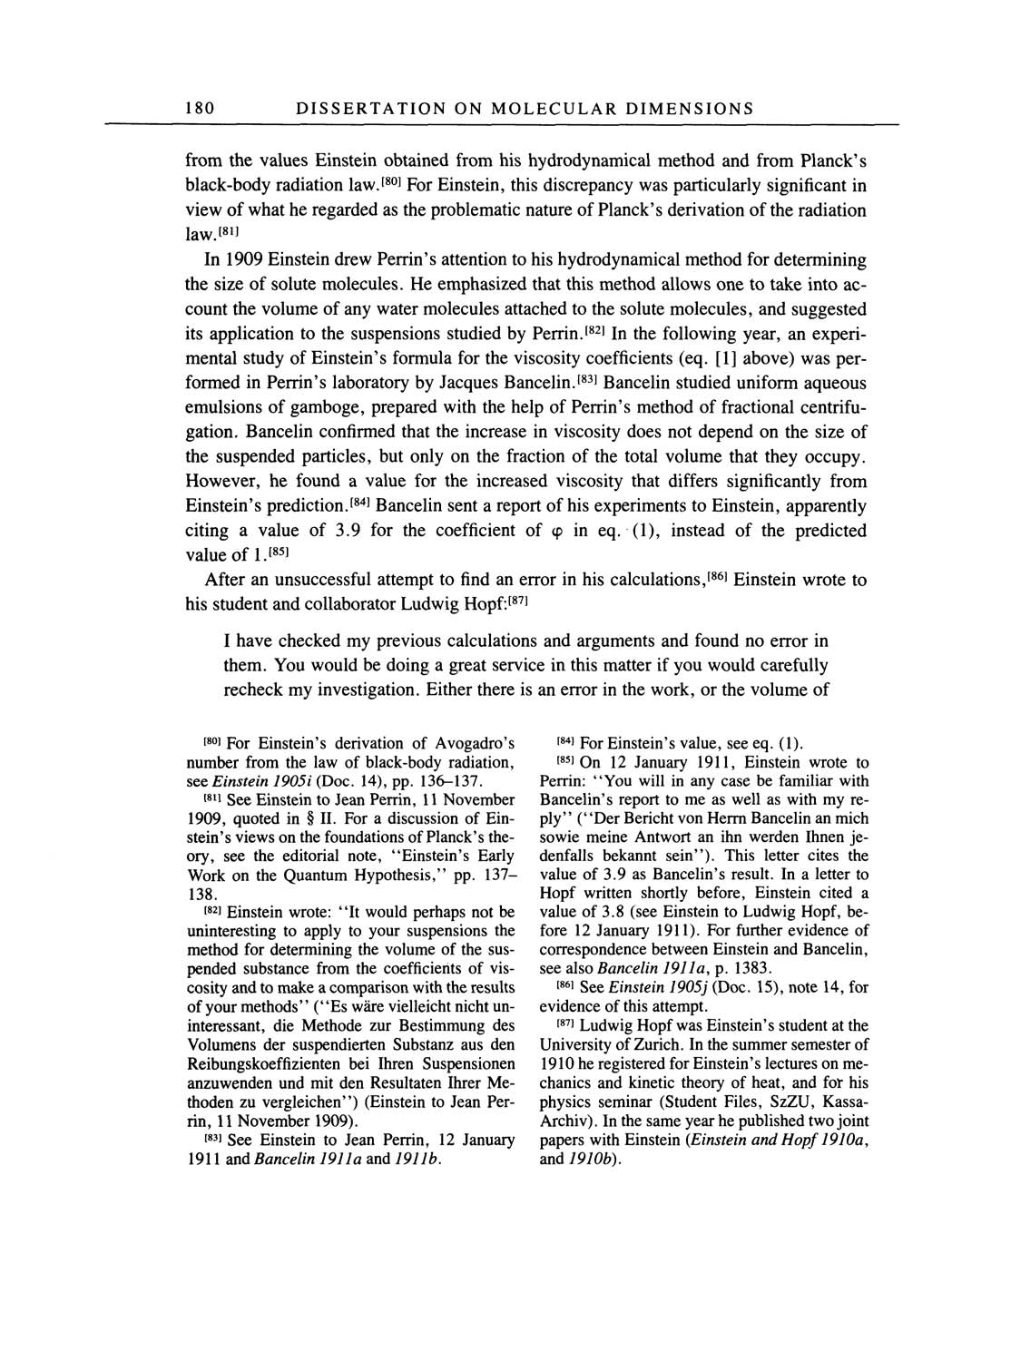 Volume 2: The Swiss Years: Writings, 1900-1909 page 180